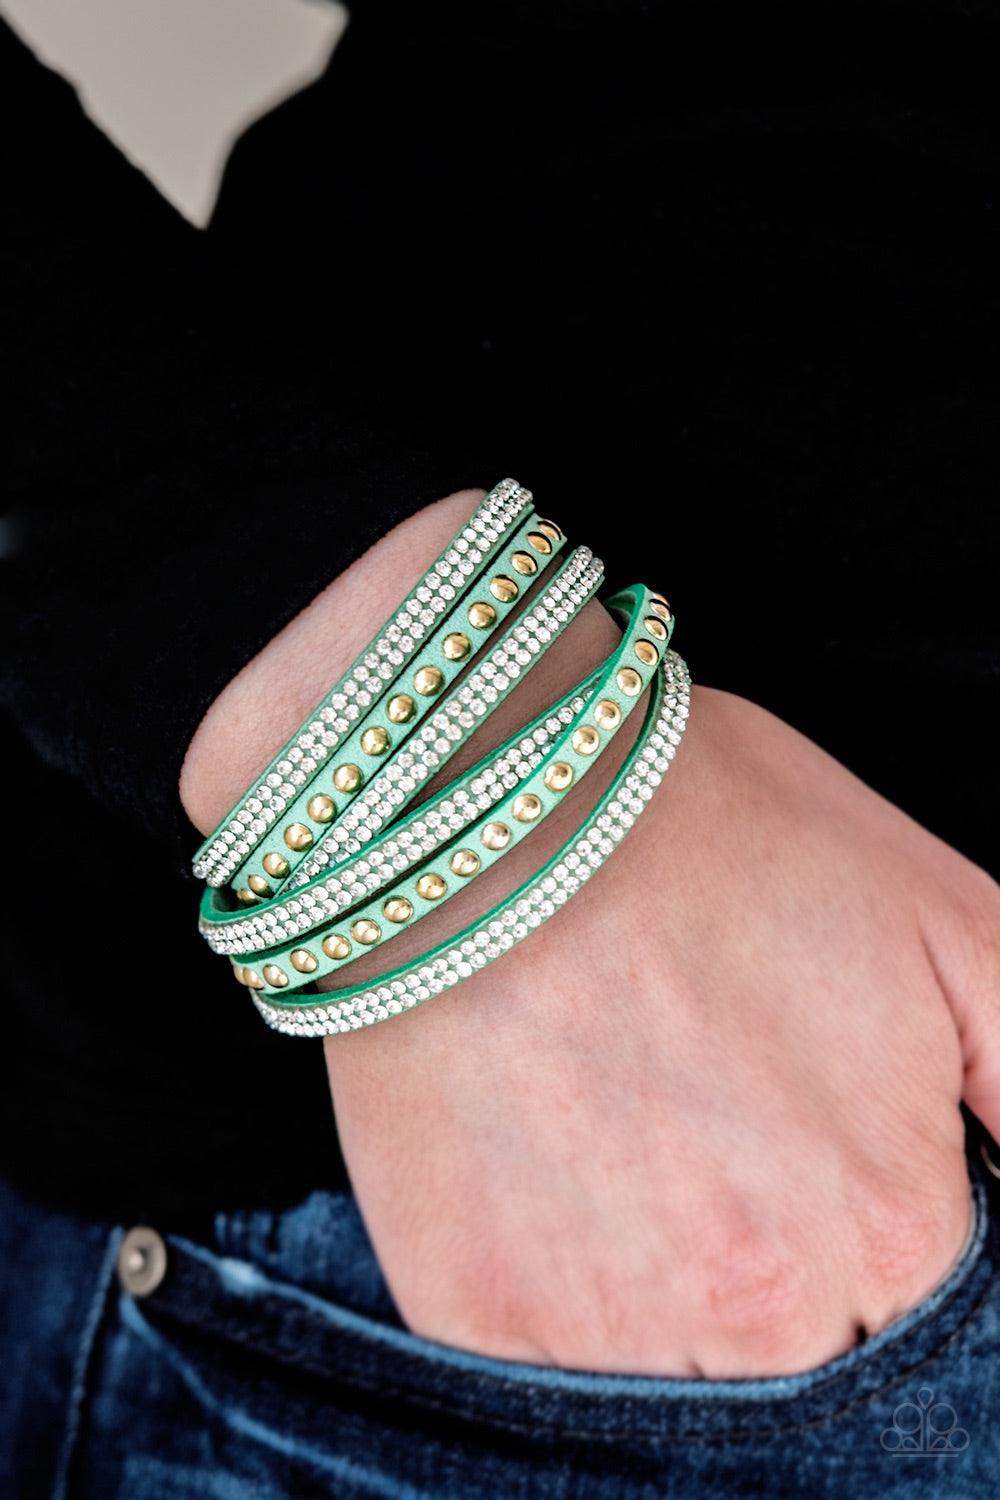 Paparazzi Accessories I Bold You So! - Blue Rows of glassy white rhinestones and glistening gold studs are pressed along three strands of minty green suede for a sassy look. The elongated band allows for a trendy double wrap design. Features an adjustable